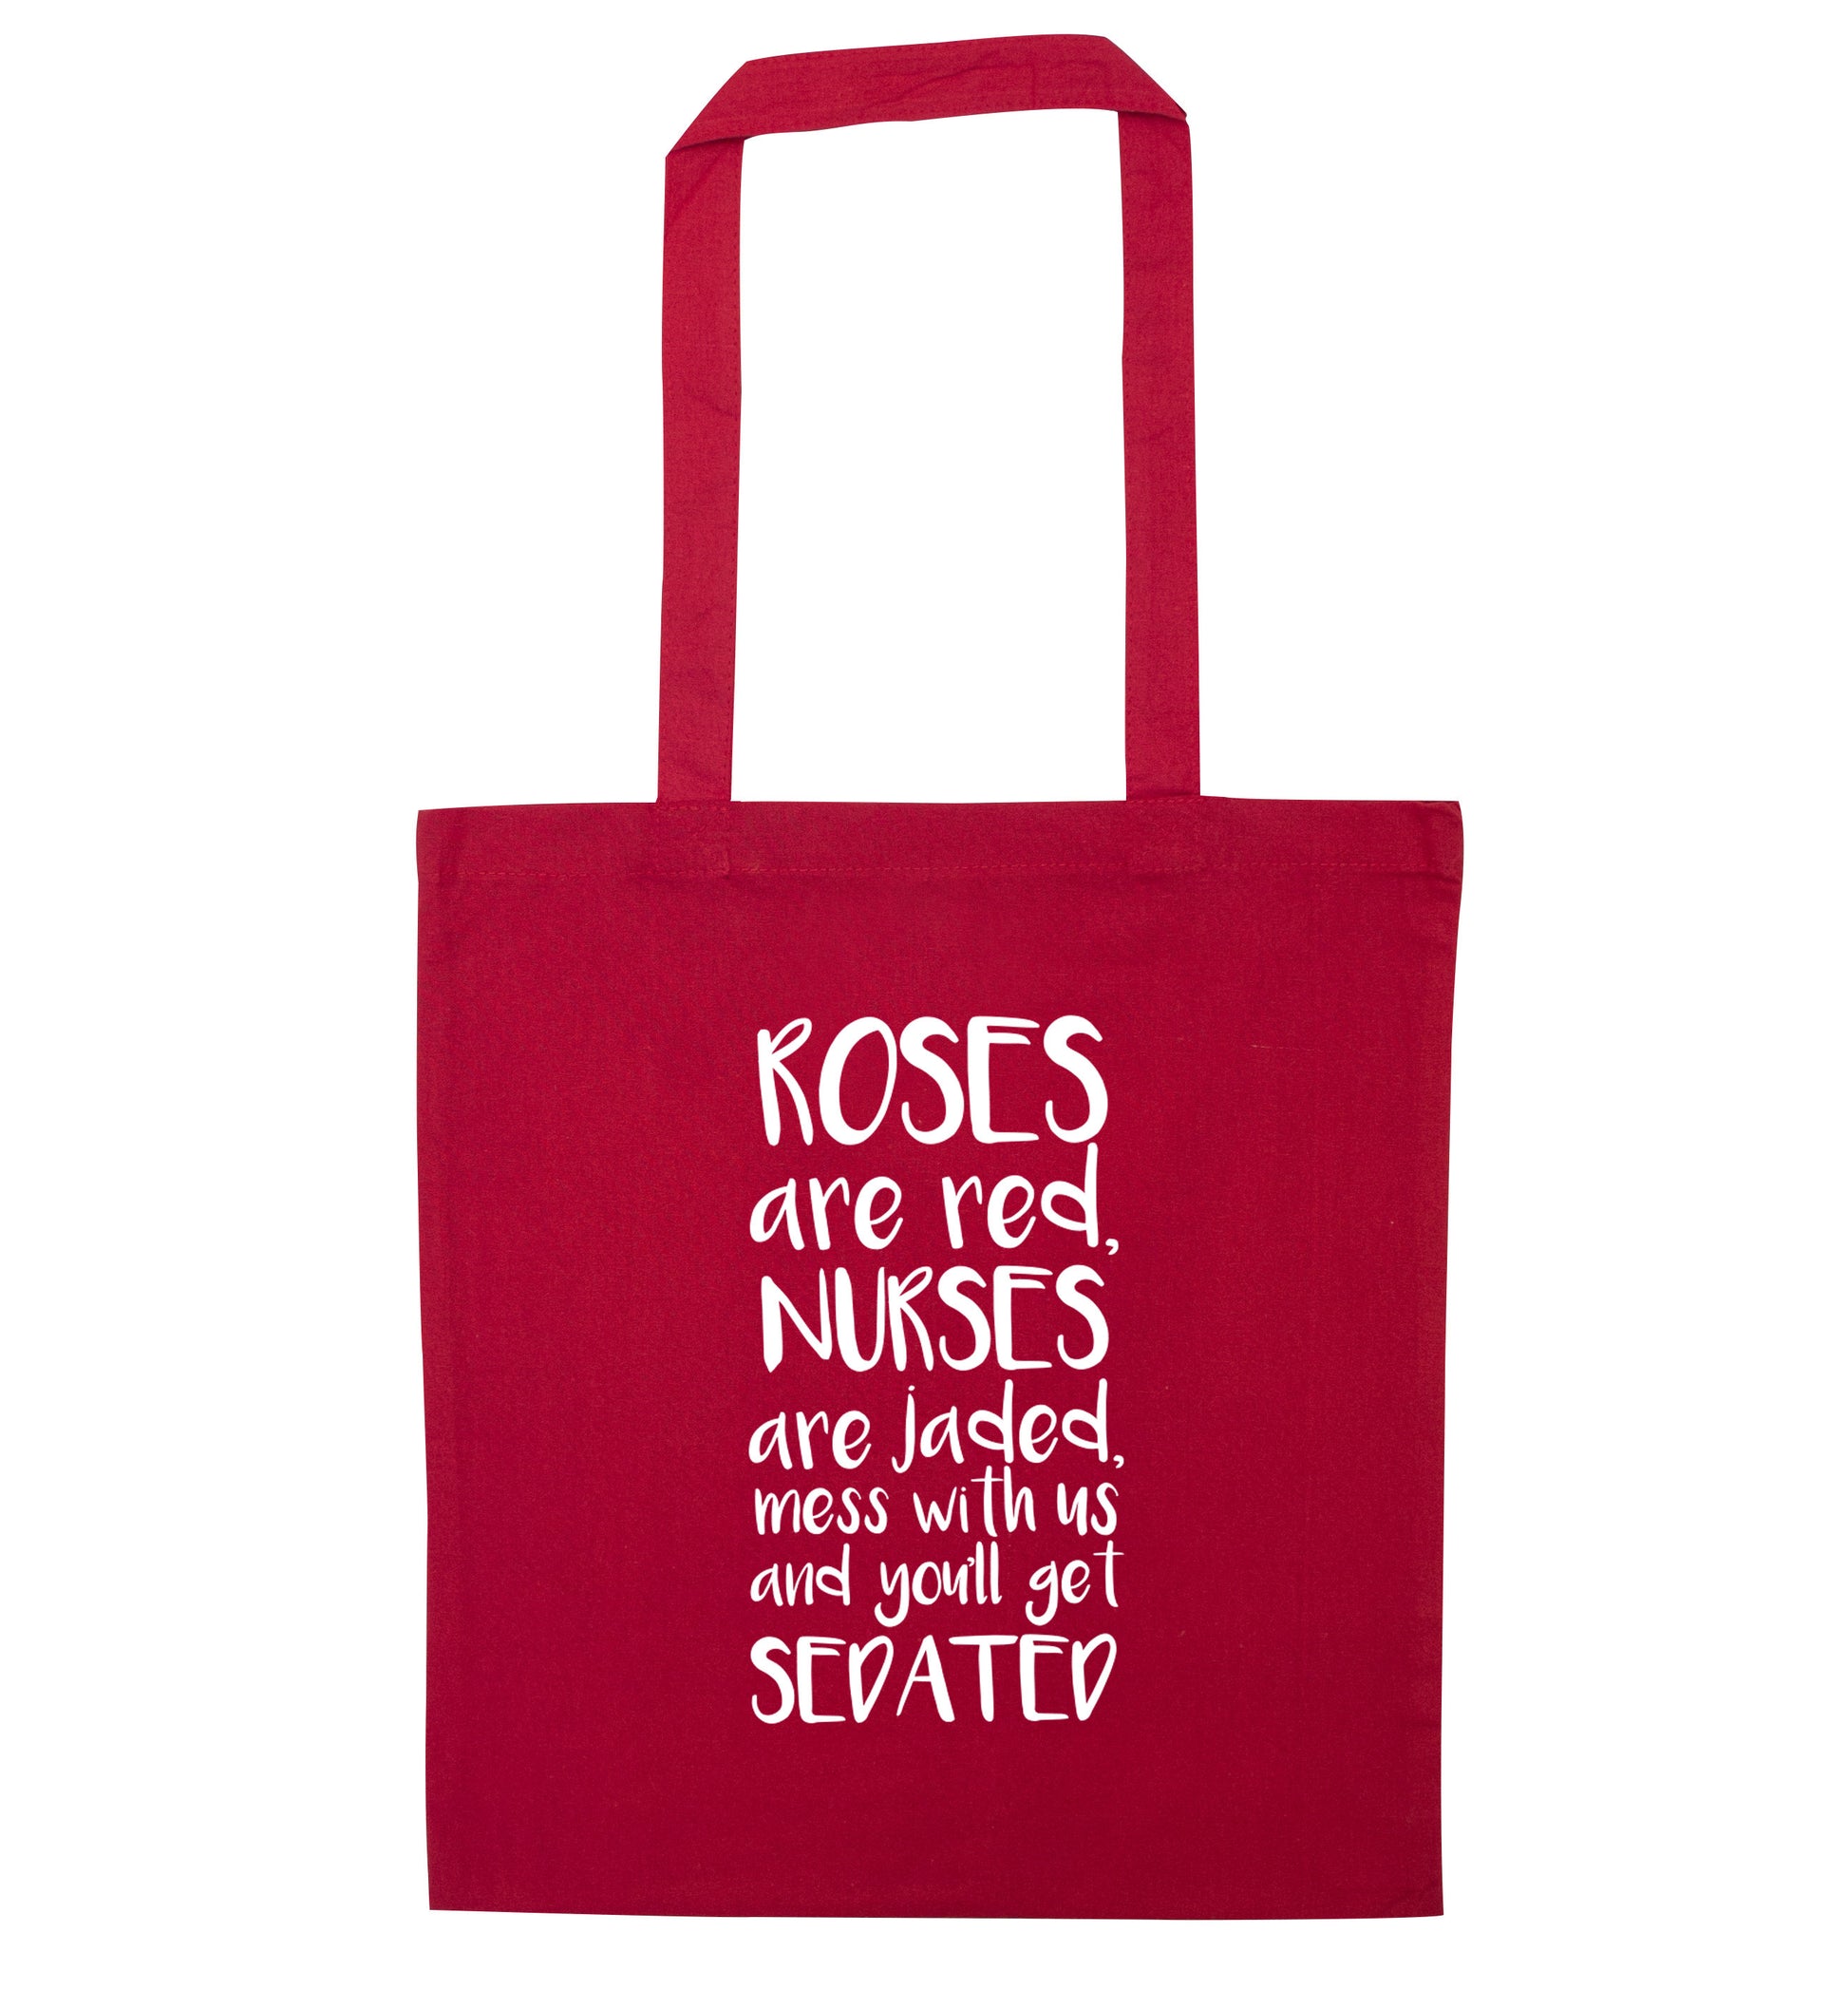 Roses are red, nurses are jaded, mess with us and you'll get sedated red tote bag